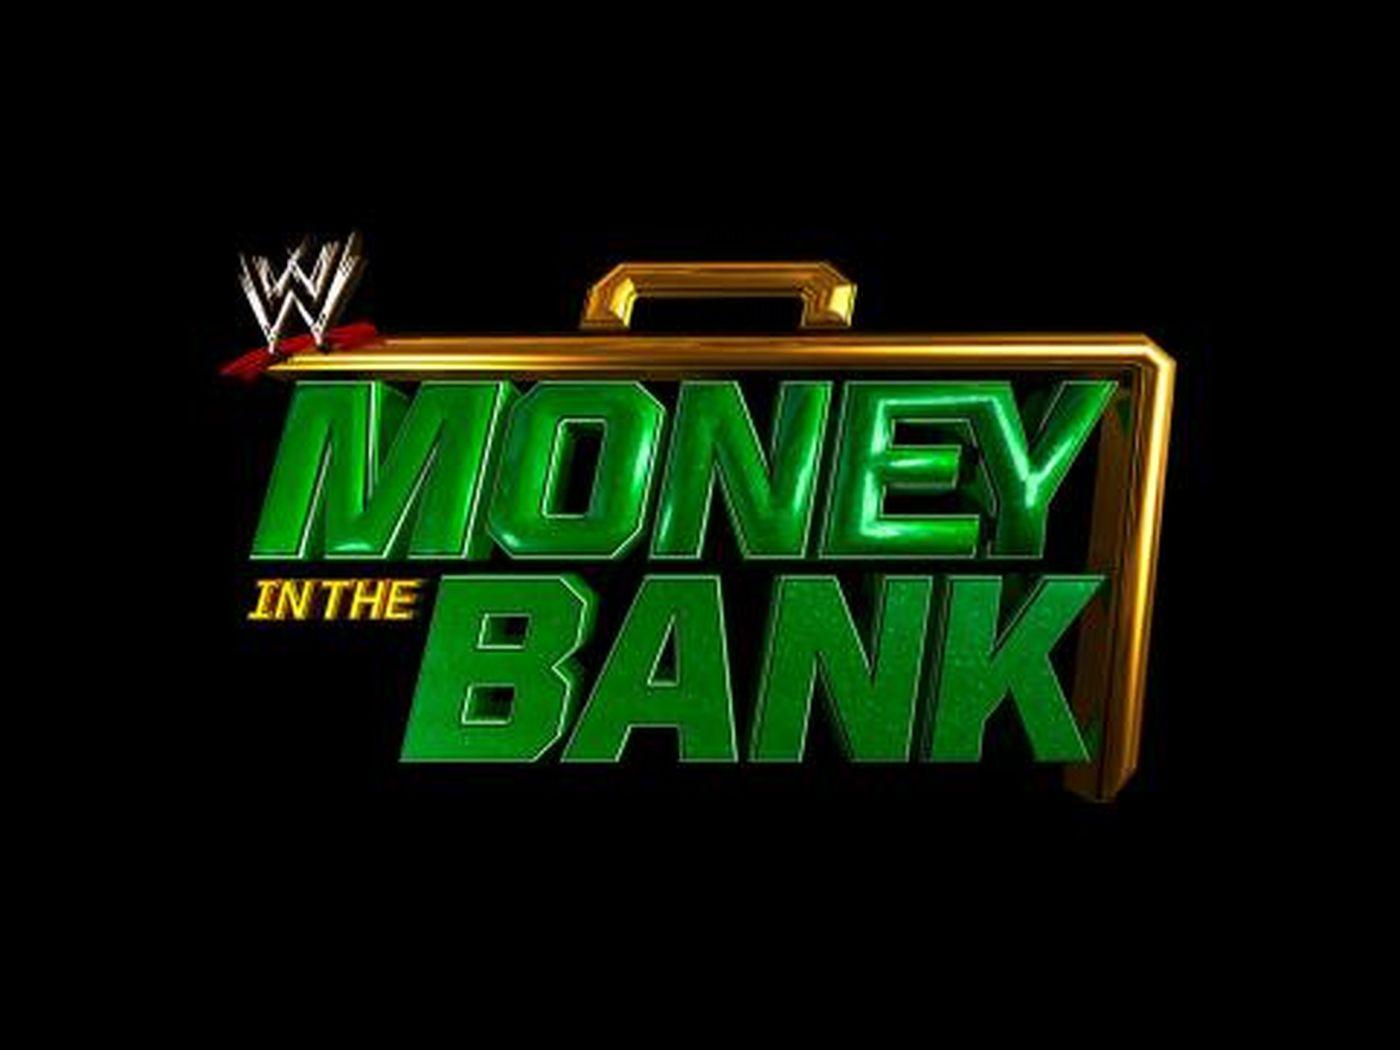 WWE Money in the Bank 2014 predictions: WWE title, Contract ladder